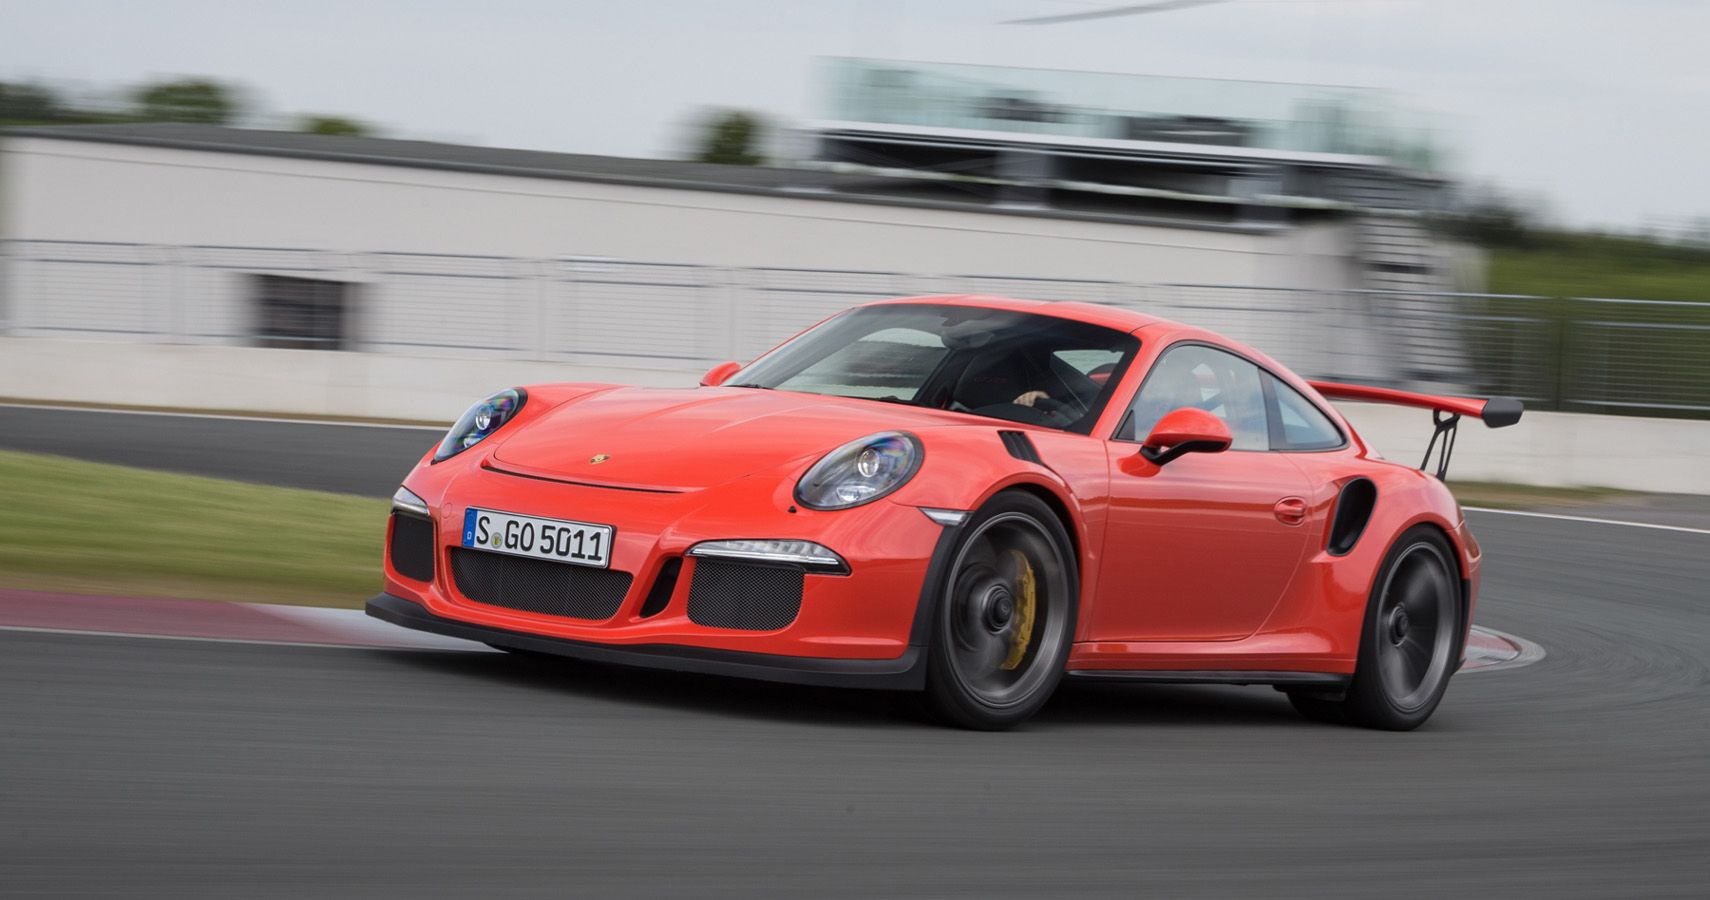 The 991 GT3 Was Introduced In 2013 And Carried A 3.8-Liter Flat-Six Later Bumped Up To A 4.0-Liter One